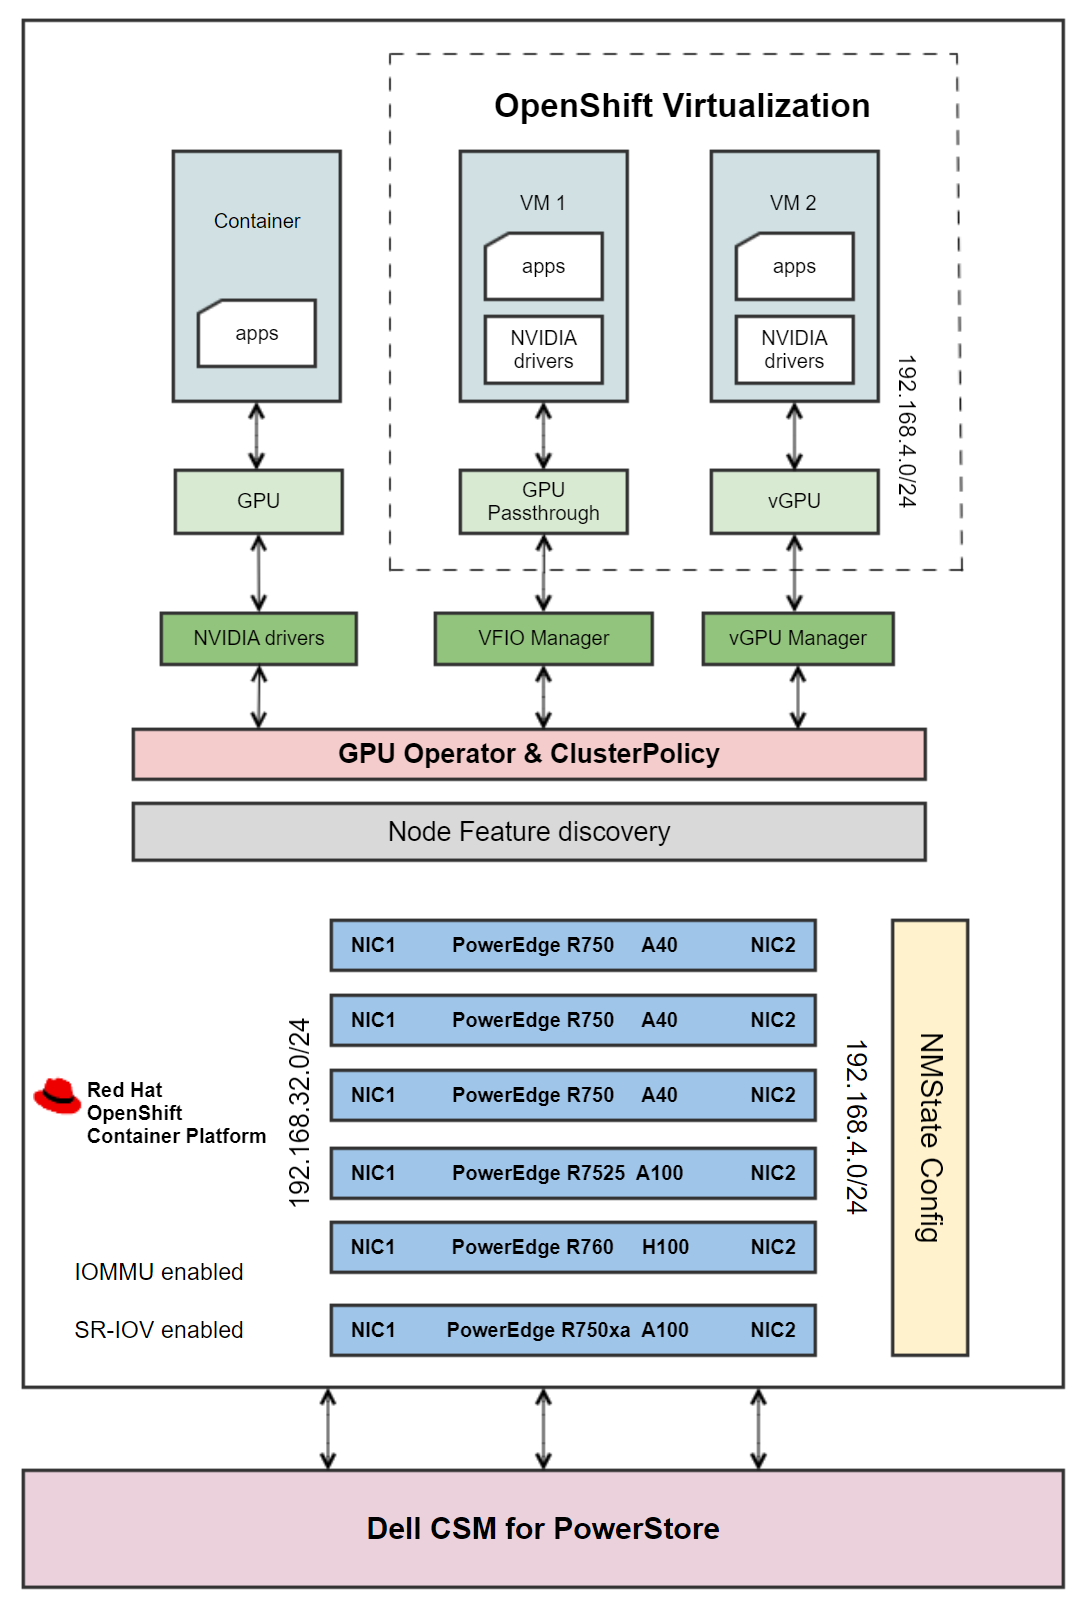 High-level architecture diagram illustrating the OpenShift Container Platform on PowerEdge servers equipped with GPU cards, integrated with Dell PowerStore, dedicated network configured for VMs, GPU Operator, OpenShift Virtualization and different drivers created for workloads.